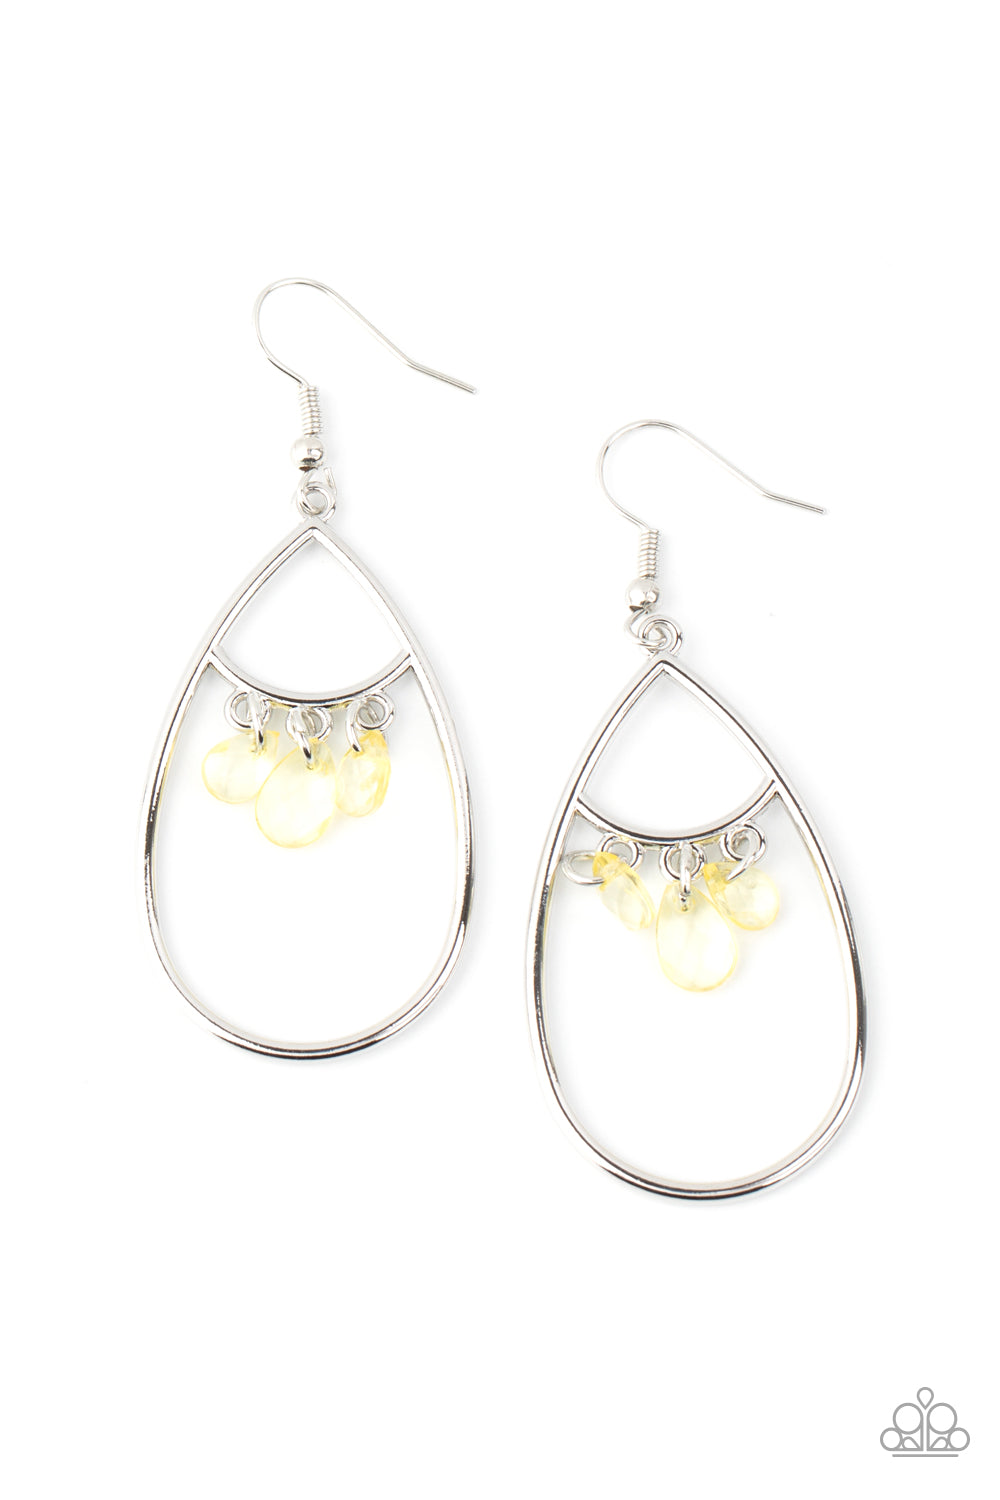 Shimmer Advisory - Yellow and Silver Fashion Earrings - Paparazzi Jewelry - Bejeweled Accessories By Kristie - Faceted yellow teardrops swing from the top of a shimmery silver teardrop, creating a colorful fringe. Earring attaches to a standard fishhook fitting. Sold as one pair of earrings.